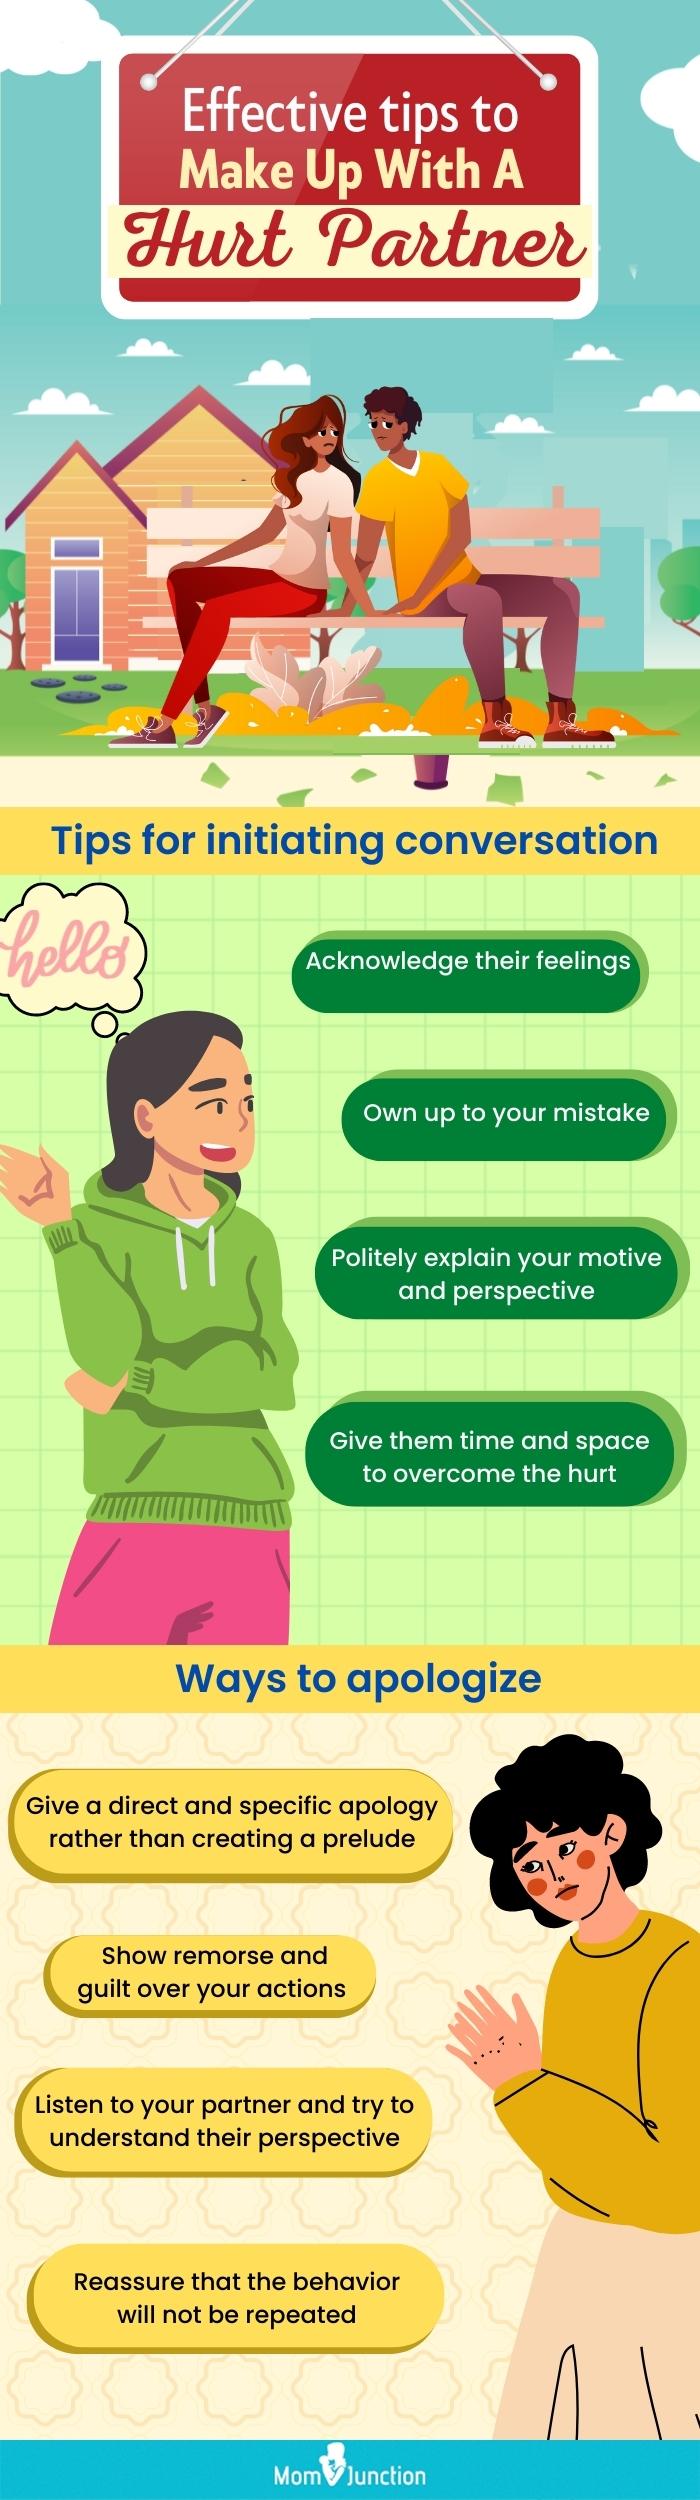 tips to make up with a hurt partner [infographic]